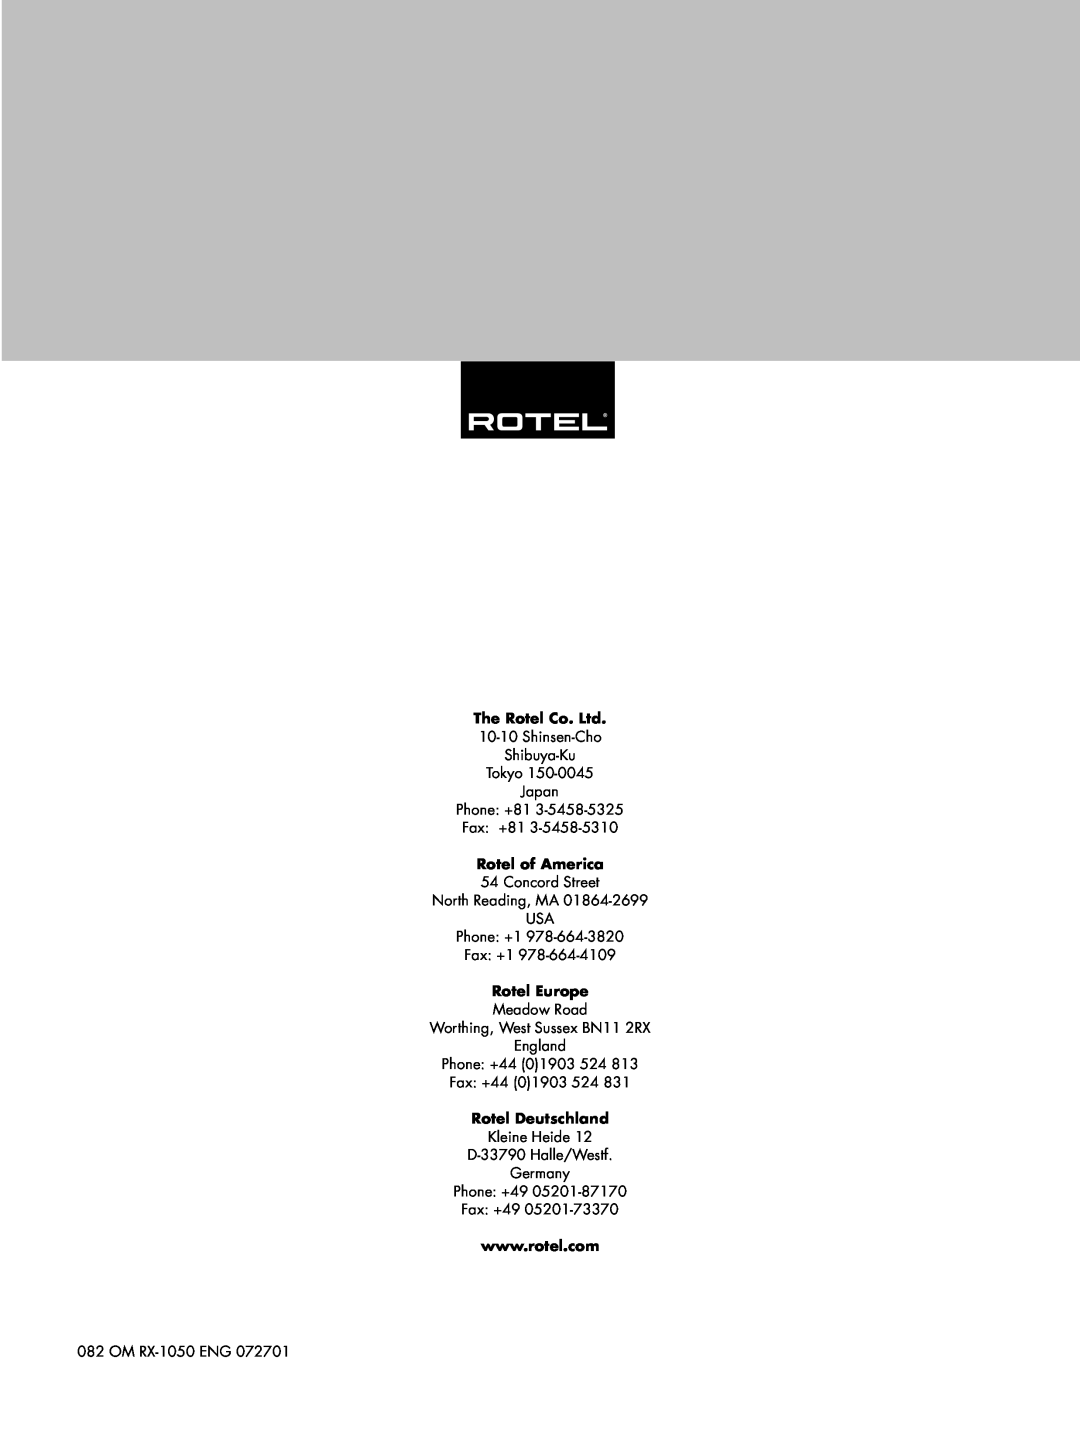 Rotel RX-1050 owner manual Rotel of America, Rotel Europe, Rotel Deutschland 